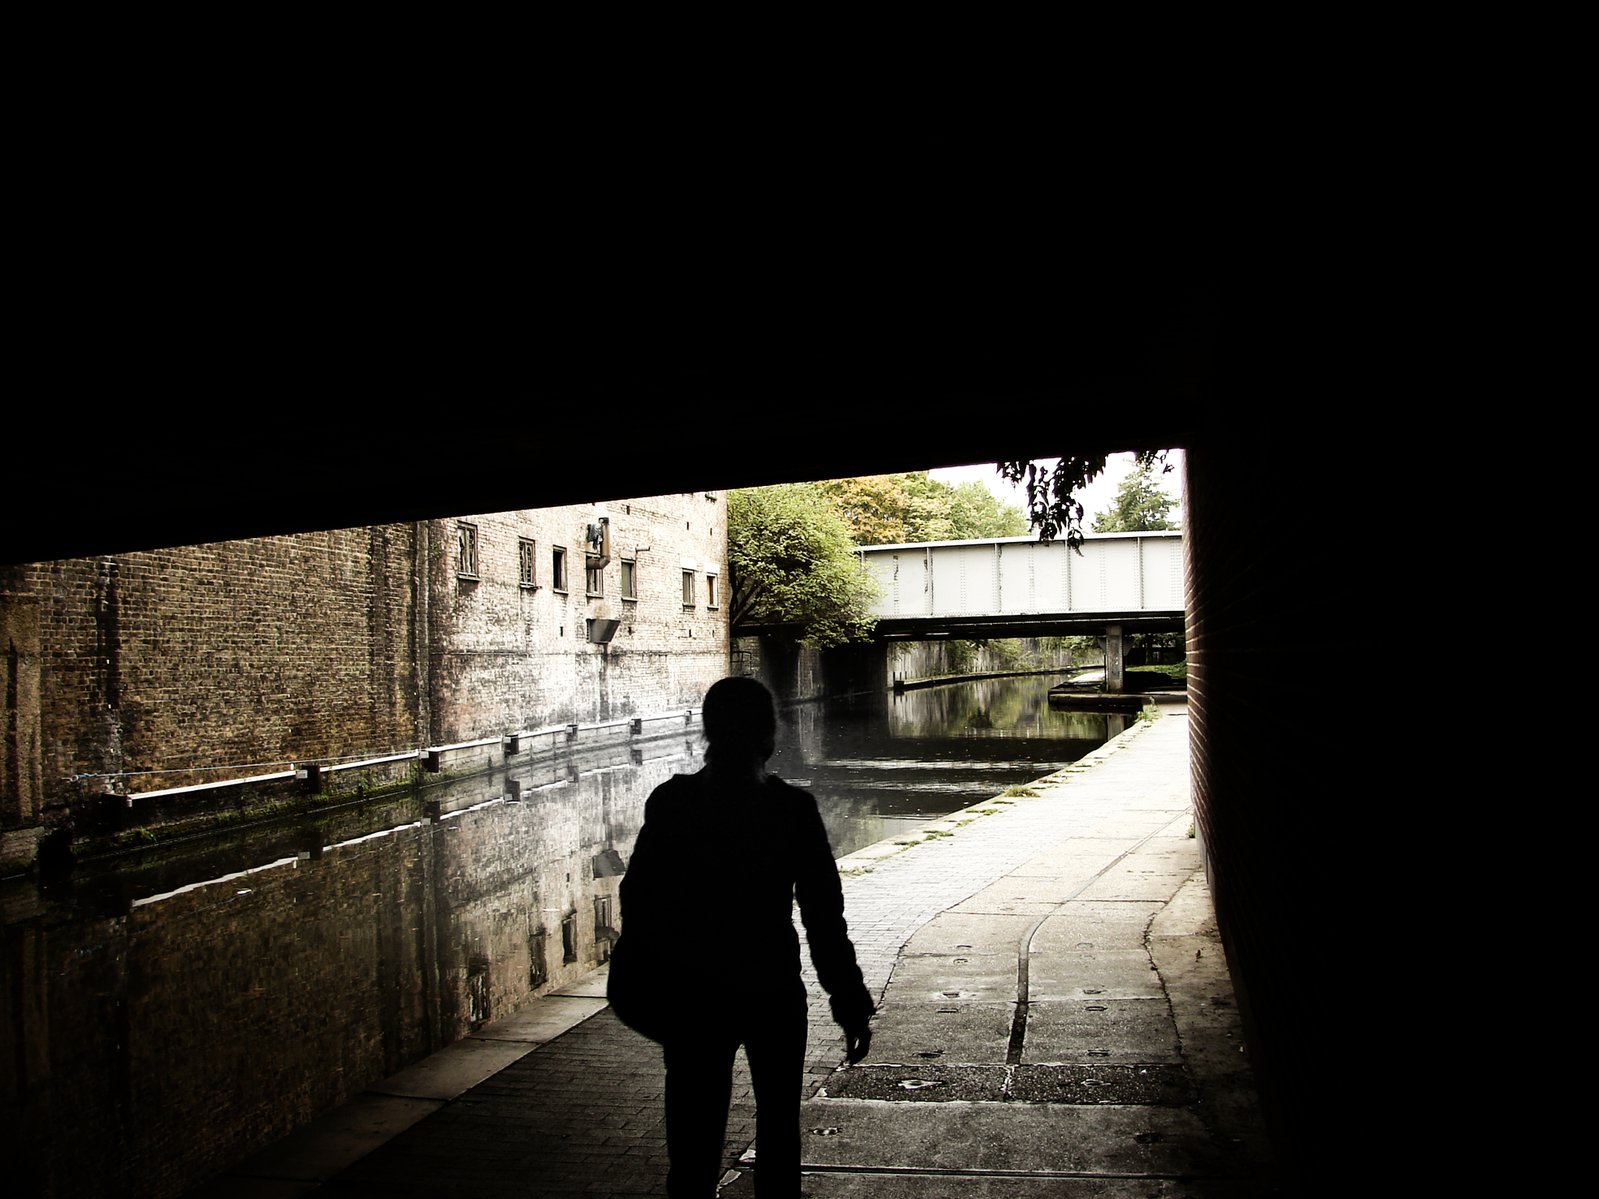 person walks under a tunnel at dusk on an unpaved walkway